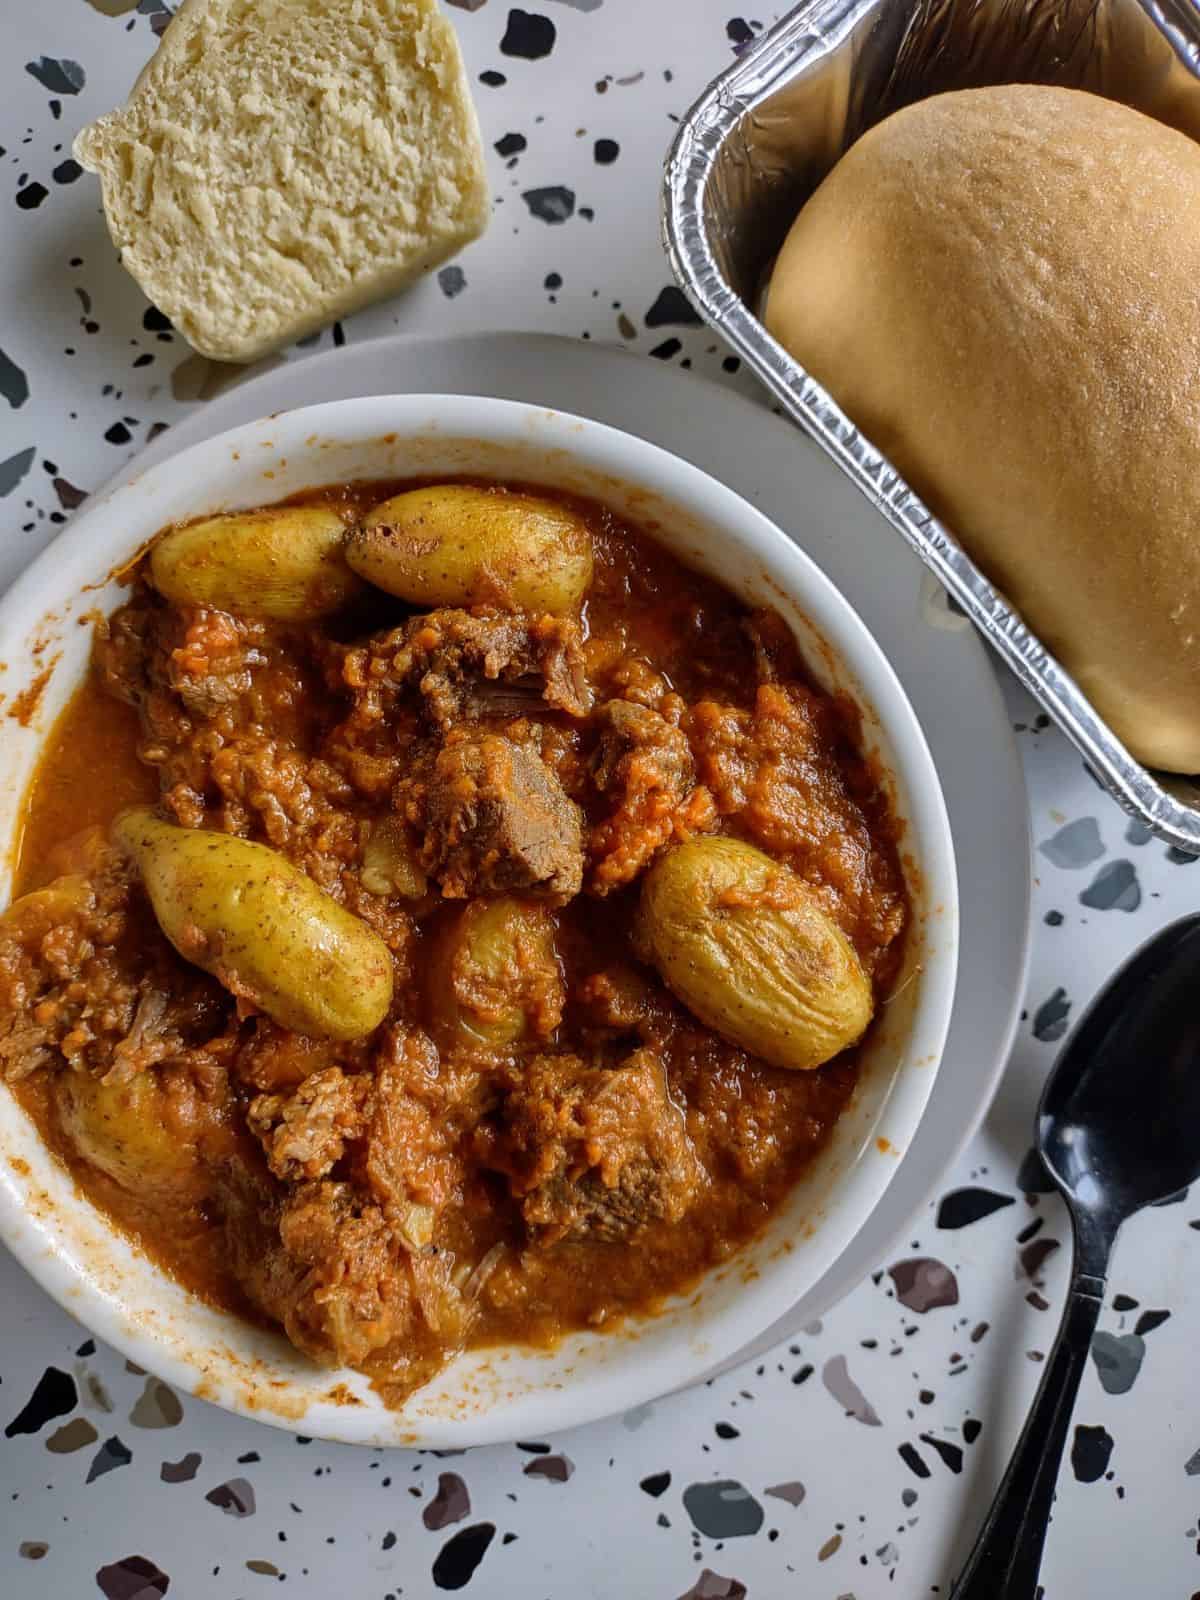 Beef stew with potatoes and carrots in a white bowl on top of a gray colored plate with a small loaf of bread next to it and a slice of bread.